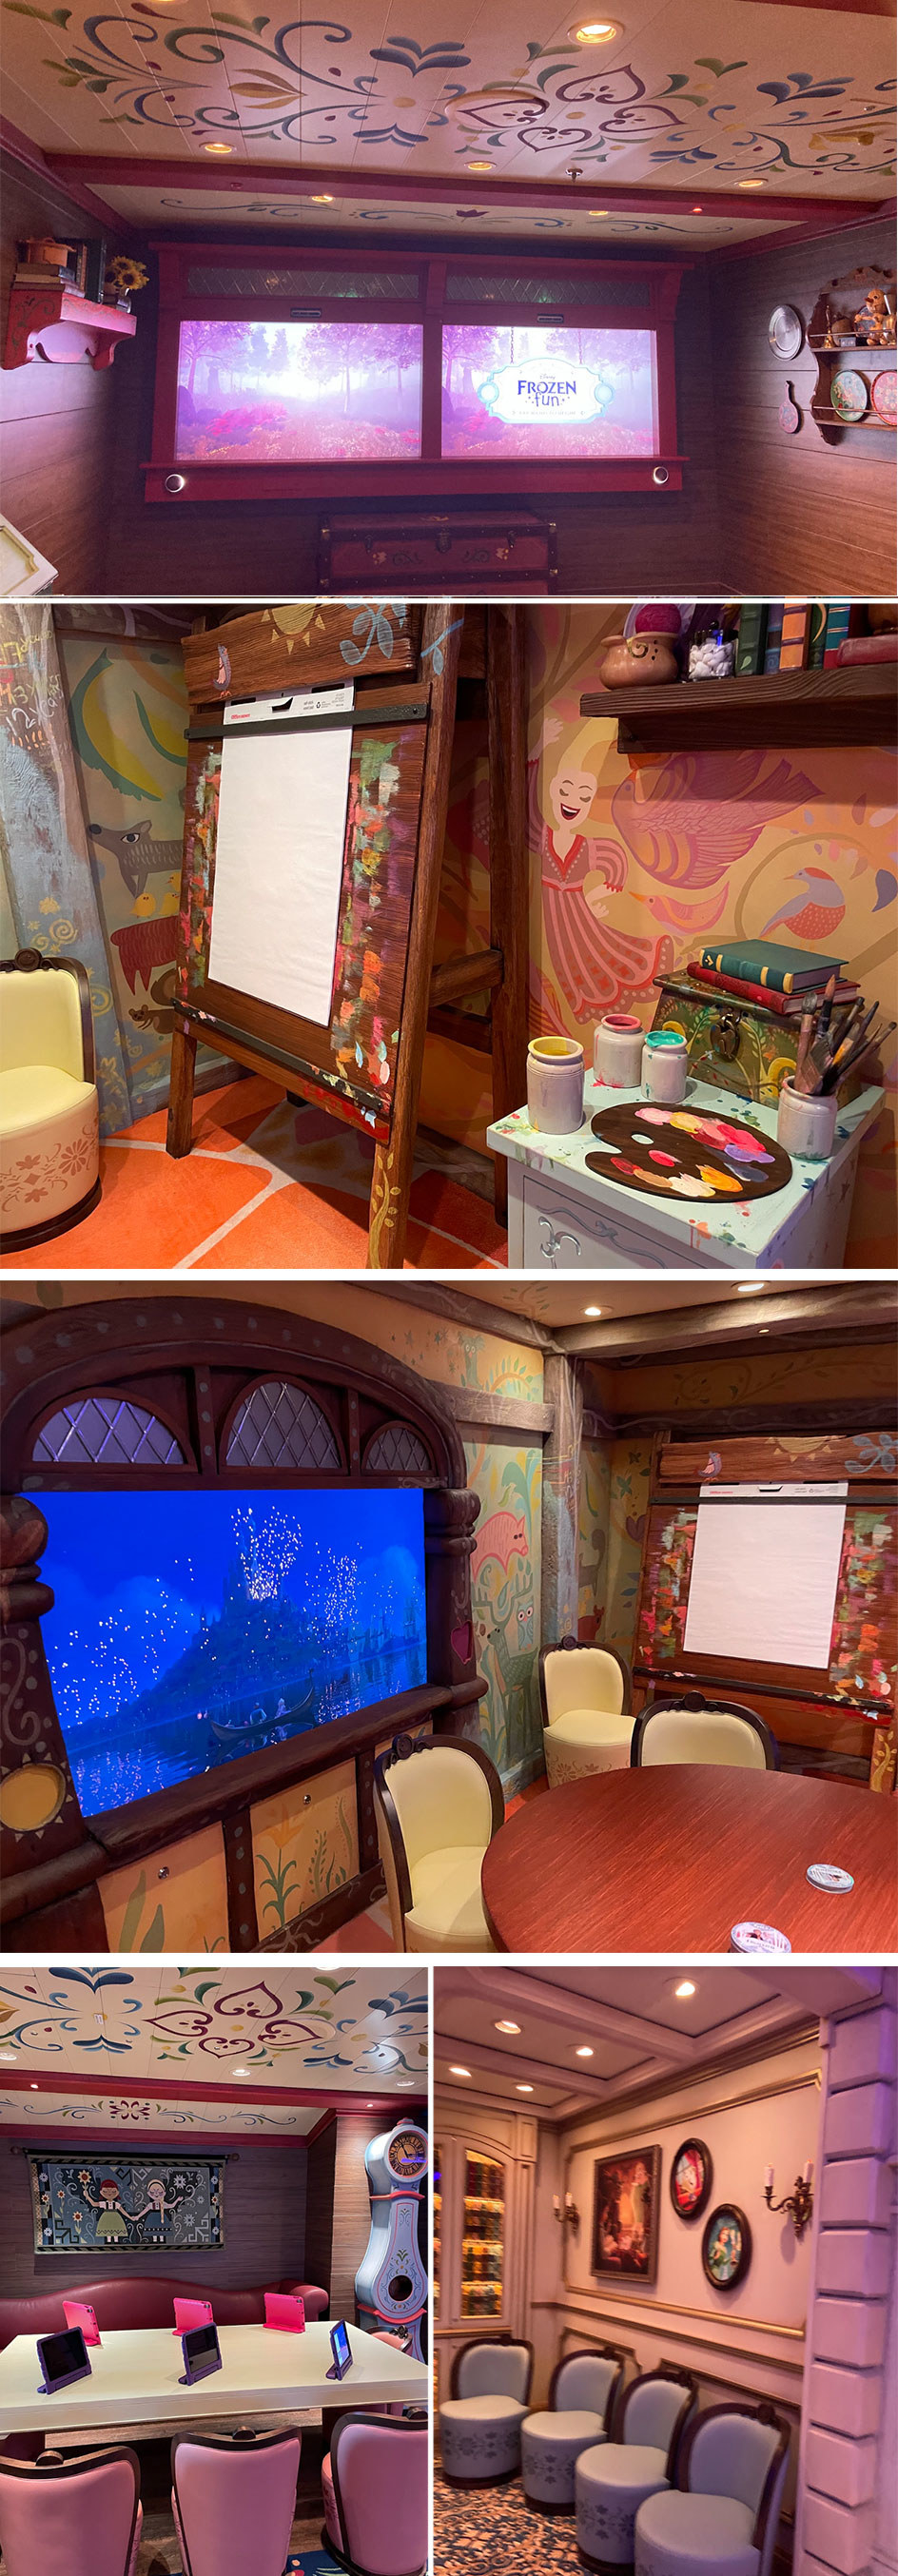 the room with plush seating, drawing easels and paints, and large screens